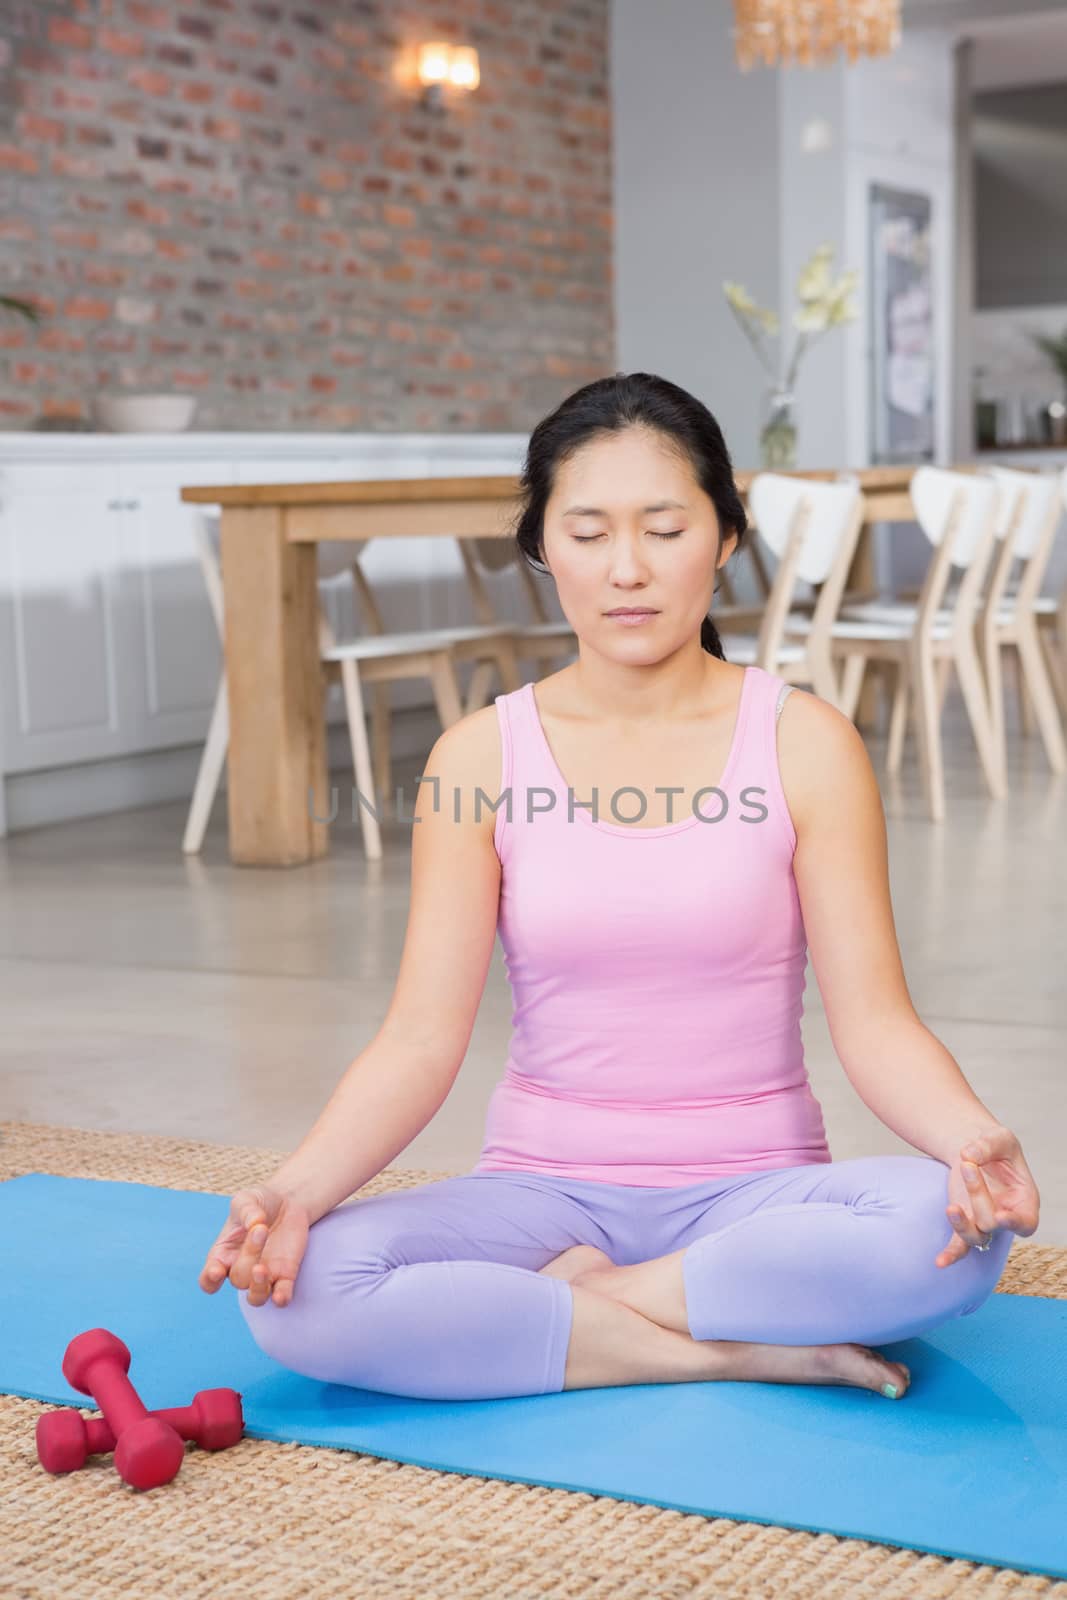 Calm woman doing yoga on mat in living room